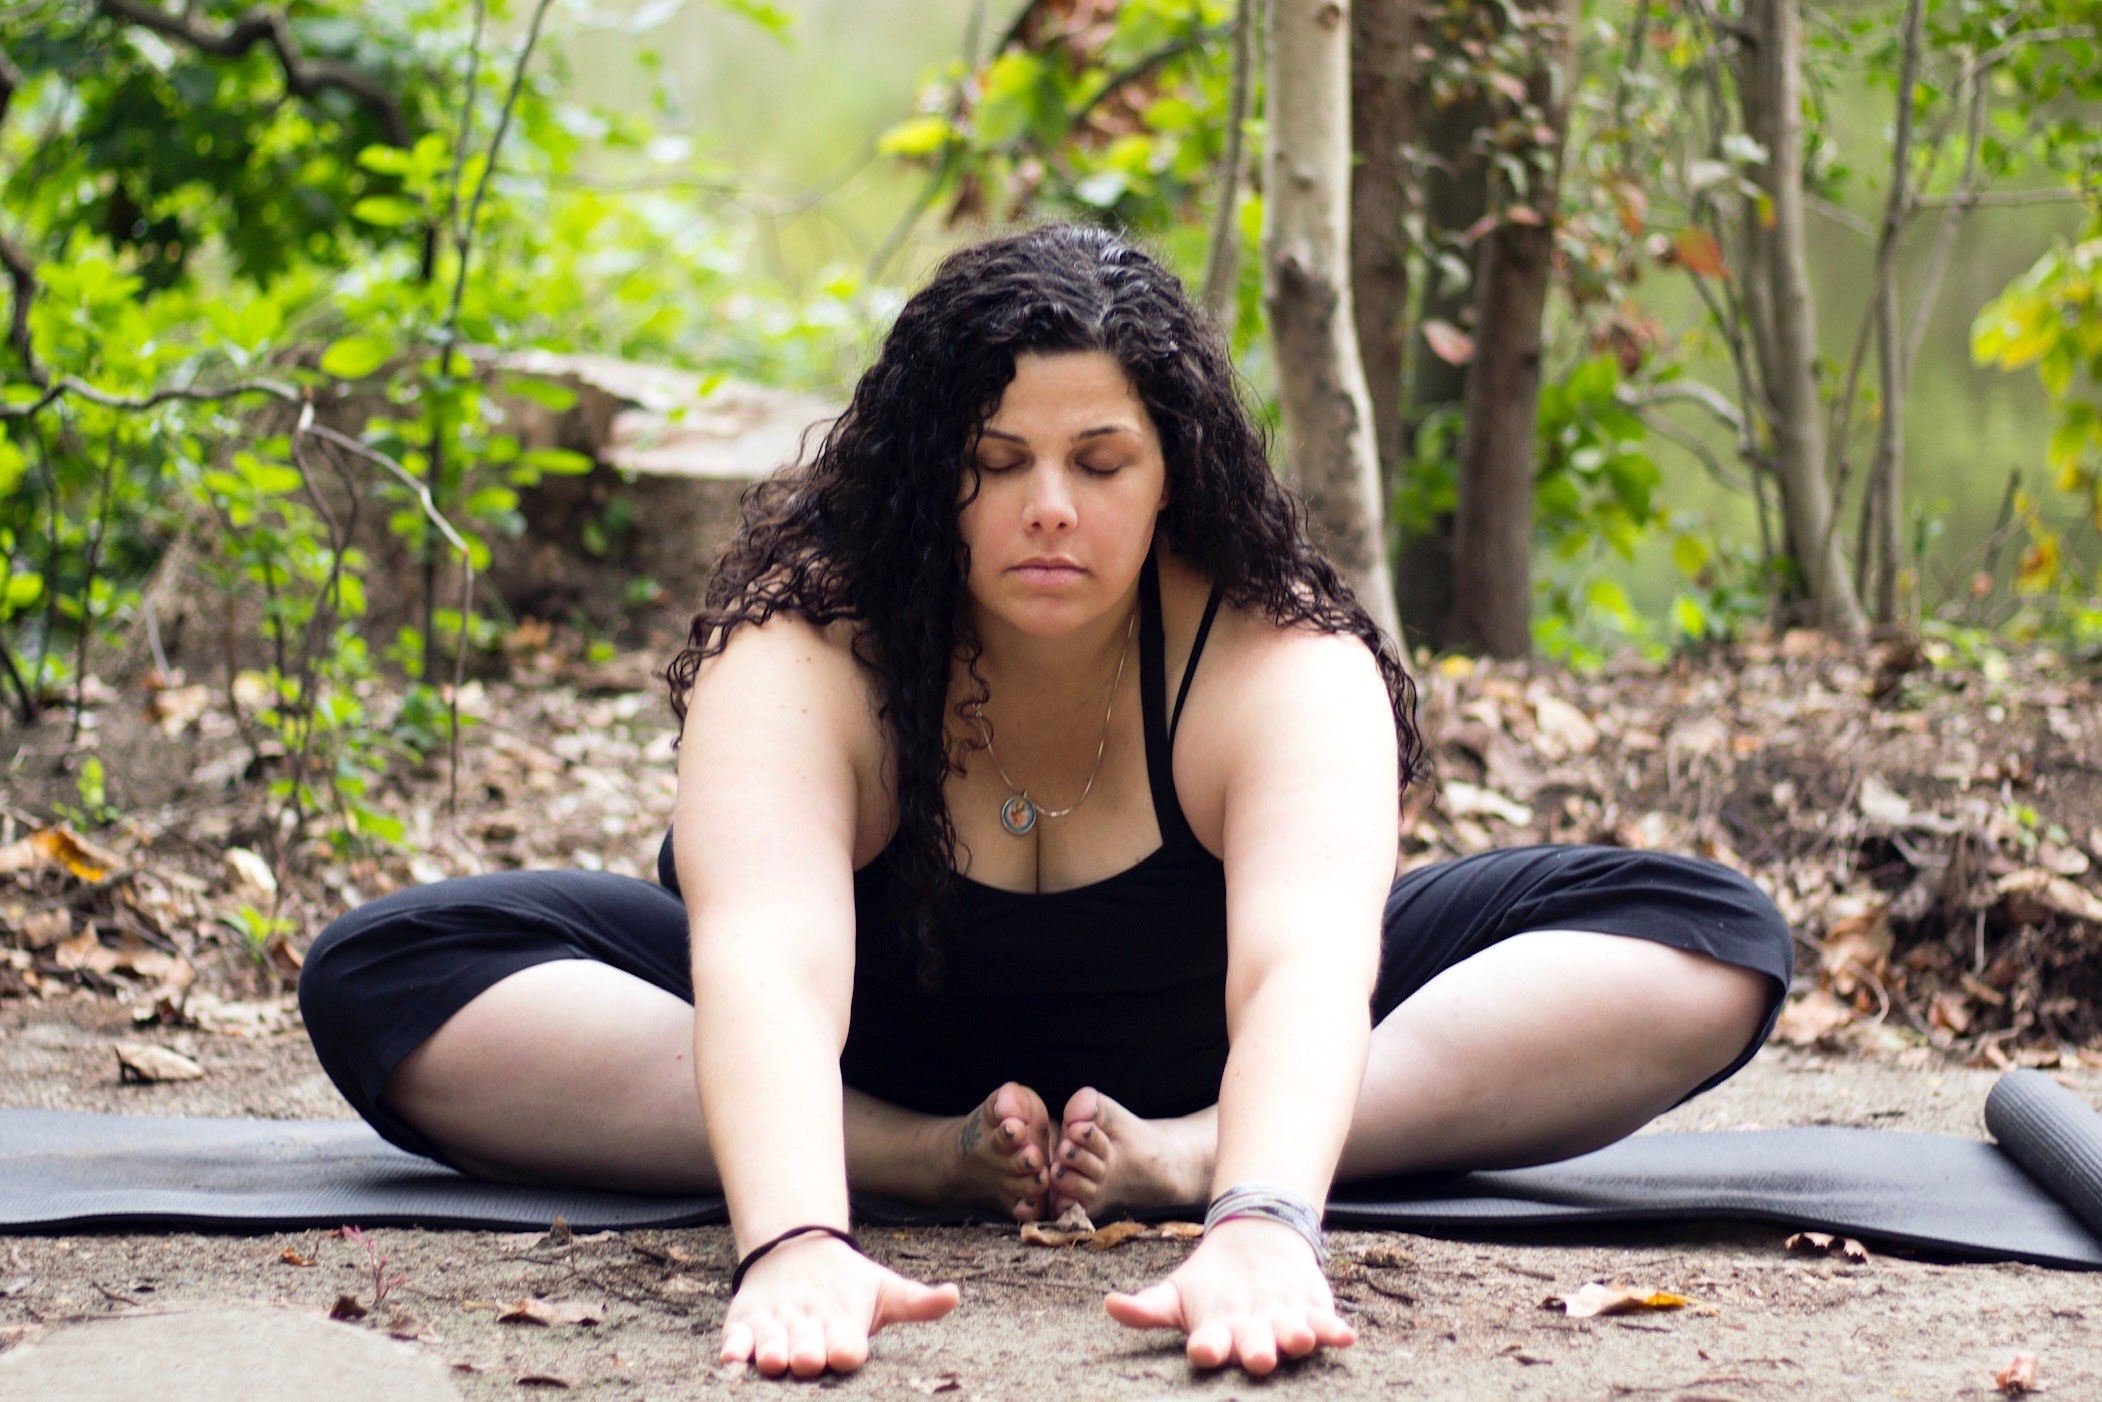 Plus Size Yoga* tips on how to get started from a plus size yoga teacher* 